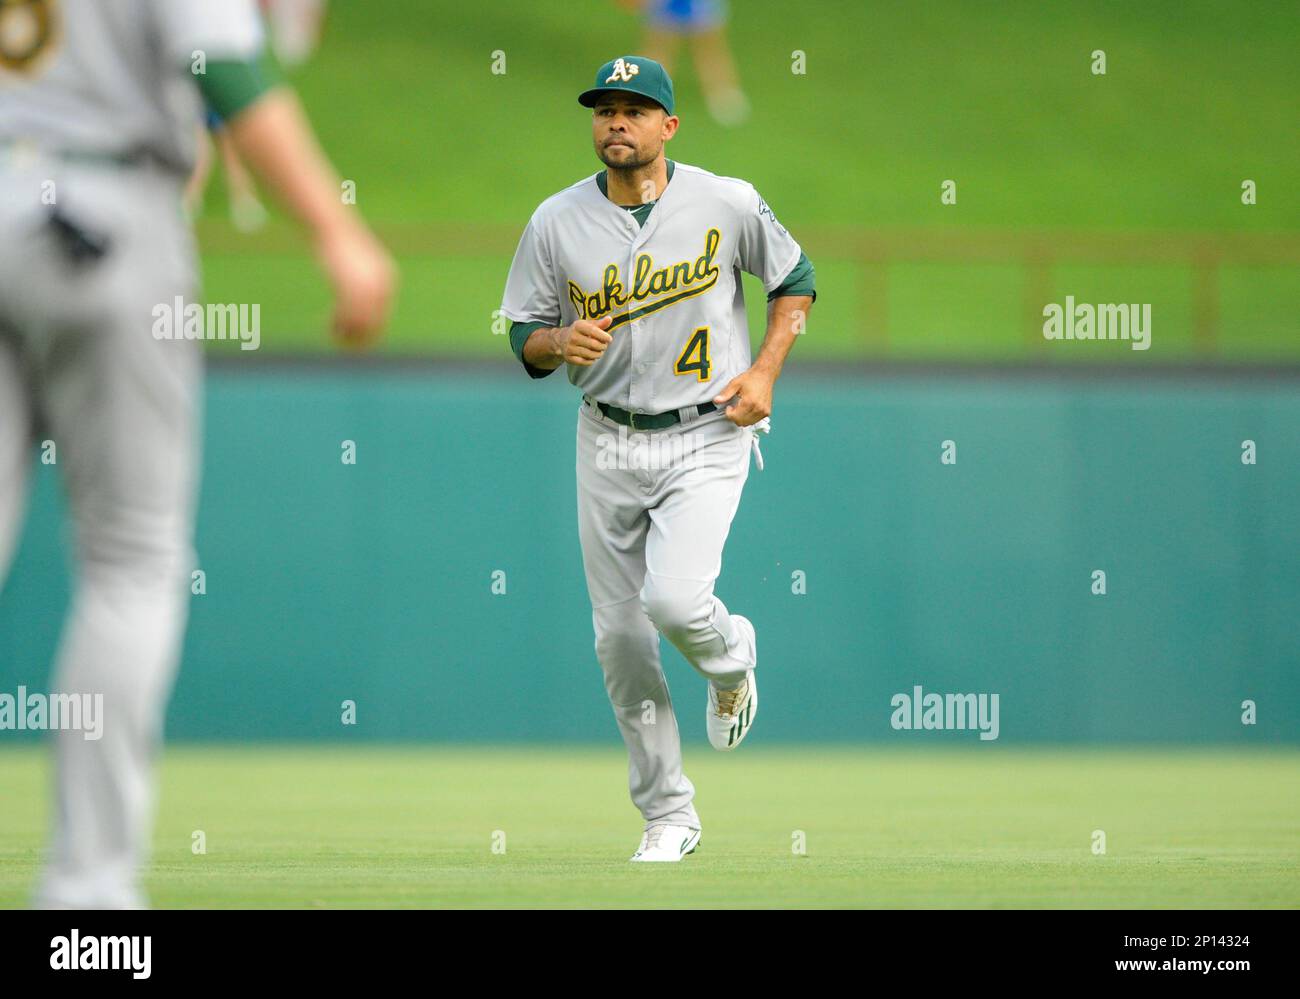 Come see how Coco Crisp is living